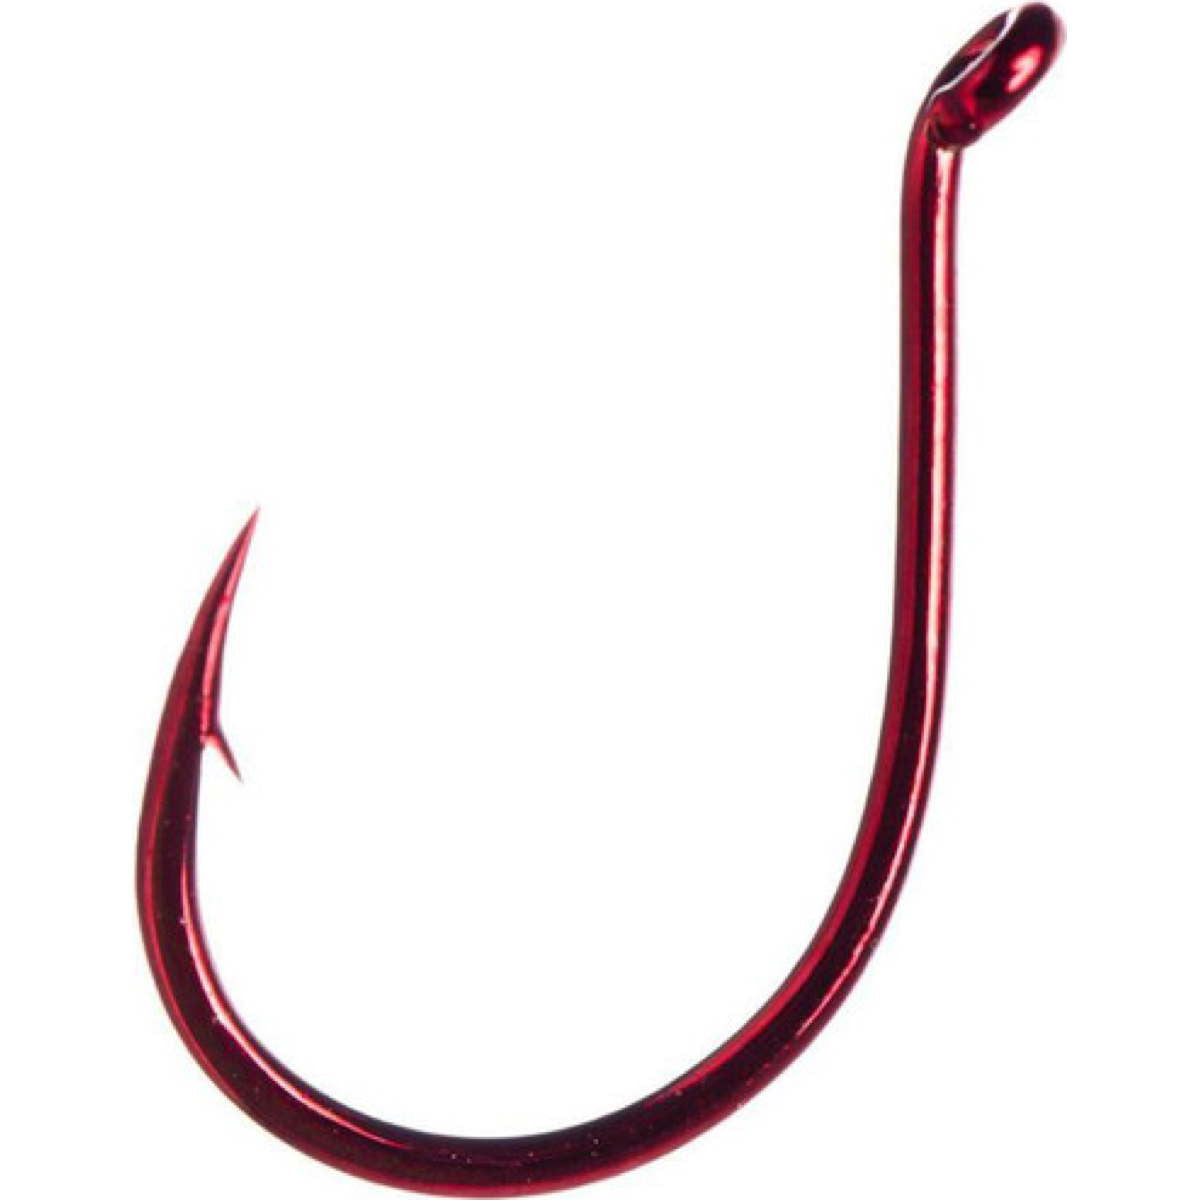 Photo of Daiichi Salmon Egg Hooks for sale at United Tackle Shops.